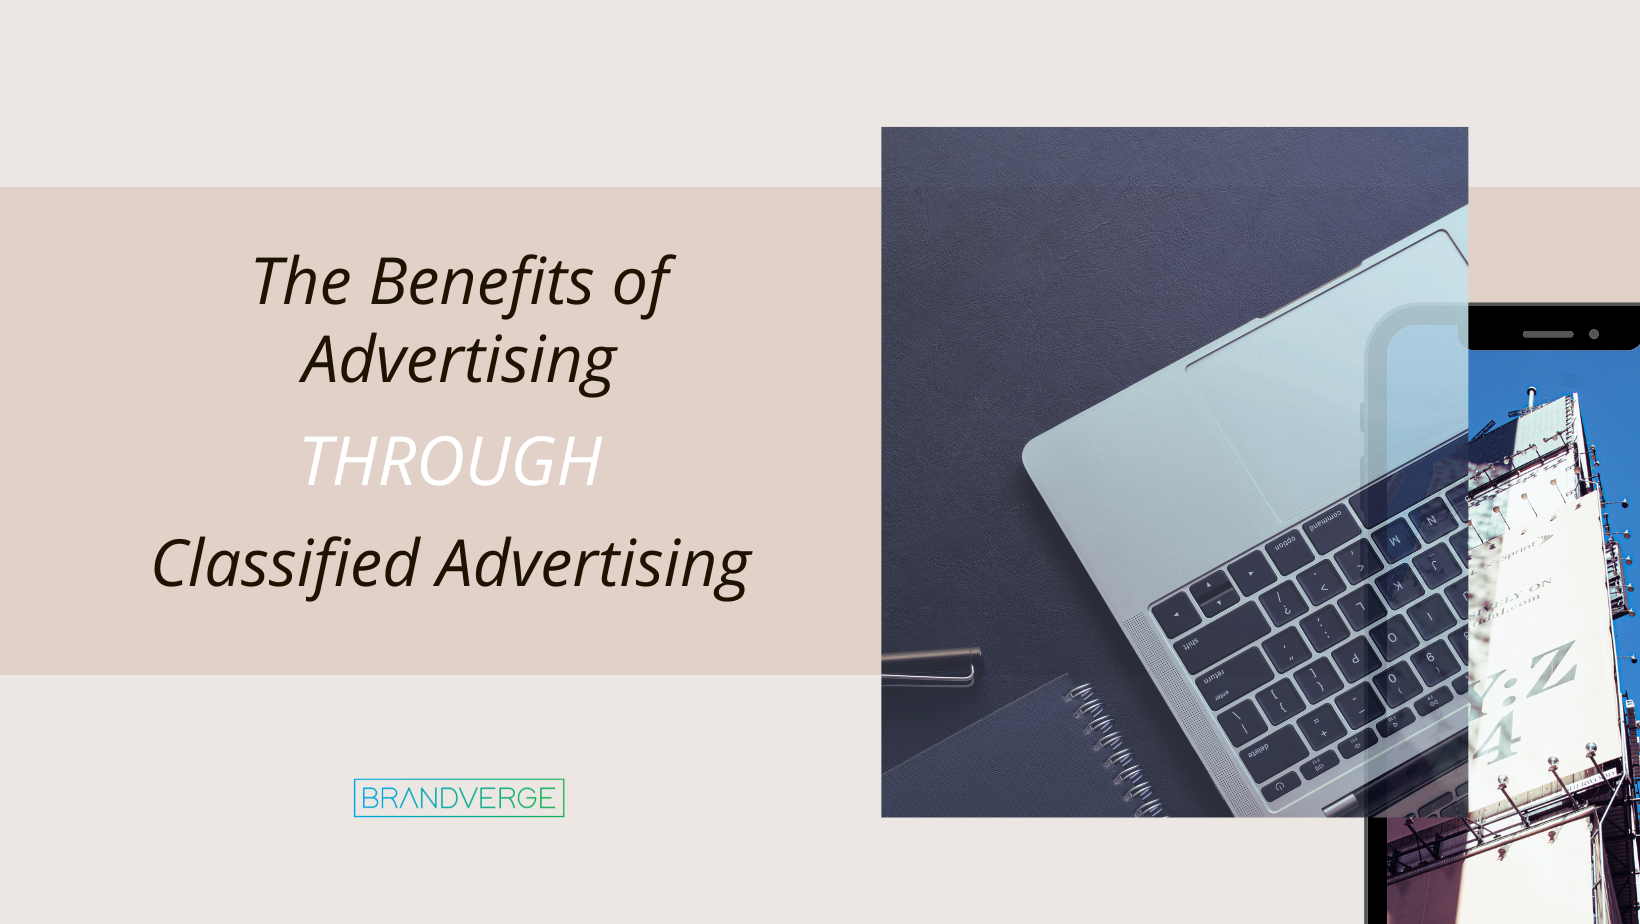 The Benefits of Advertising Through Classified Advertising